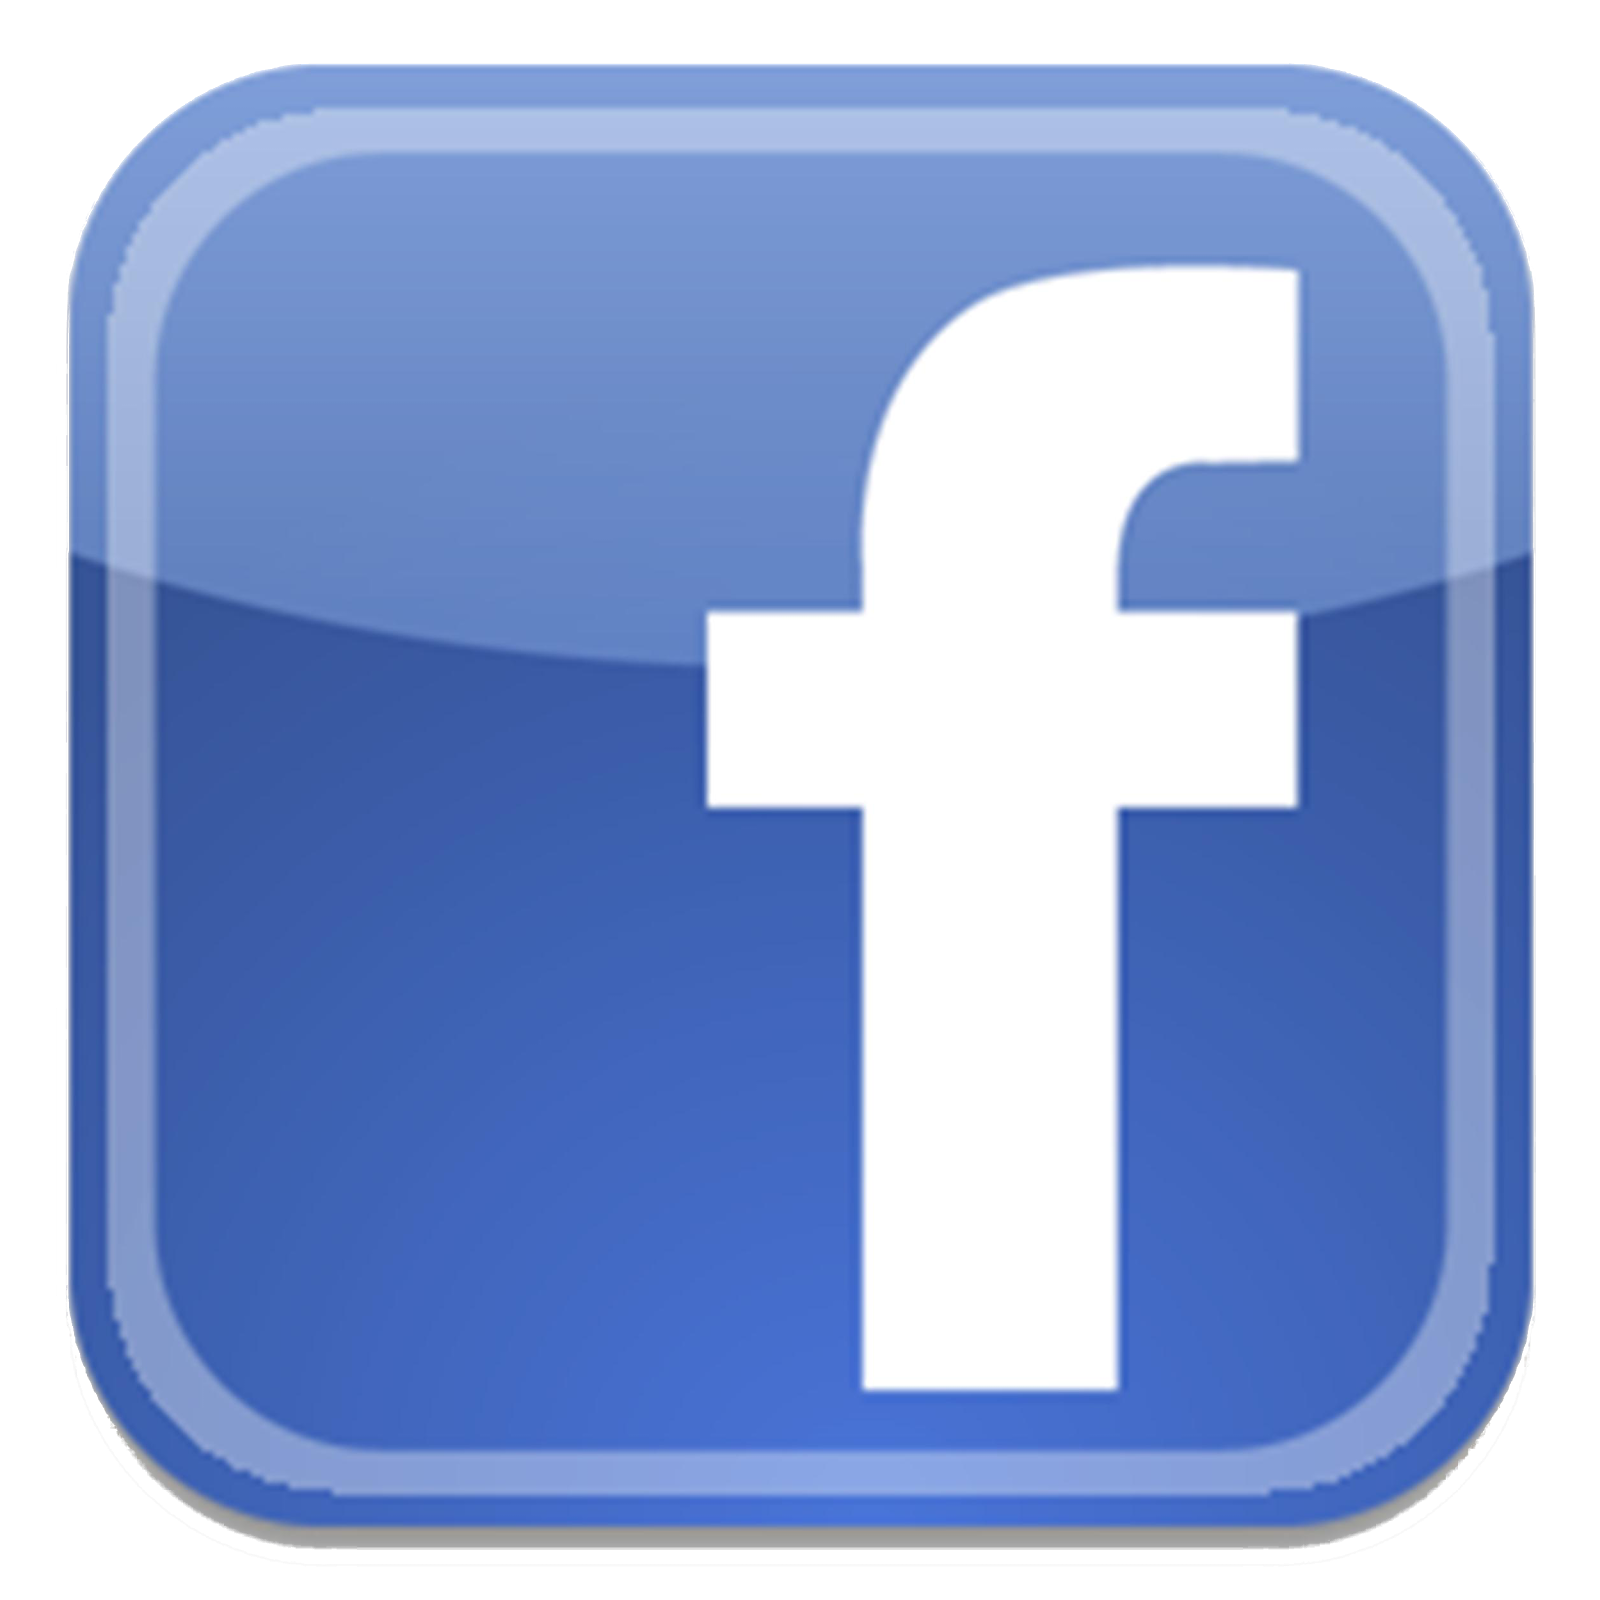 logo-facebook-facebook-logo-transparent-png-pictures-icons-and-10